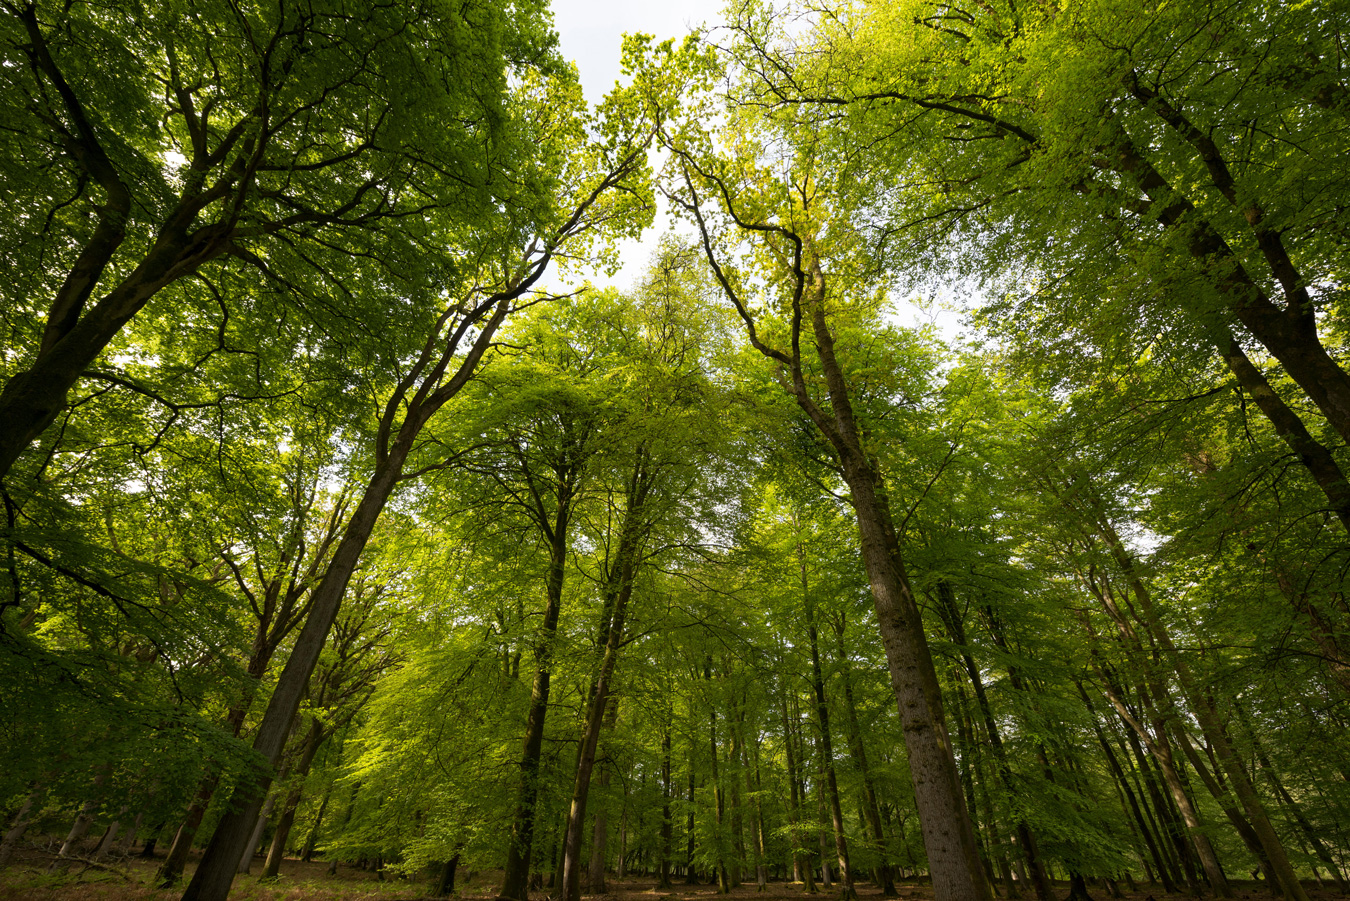 An inclosure of beech trees in the New Forest, Hampshire, UK. Credit: Brian Fairbrother / Alamy Stock Photo.